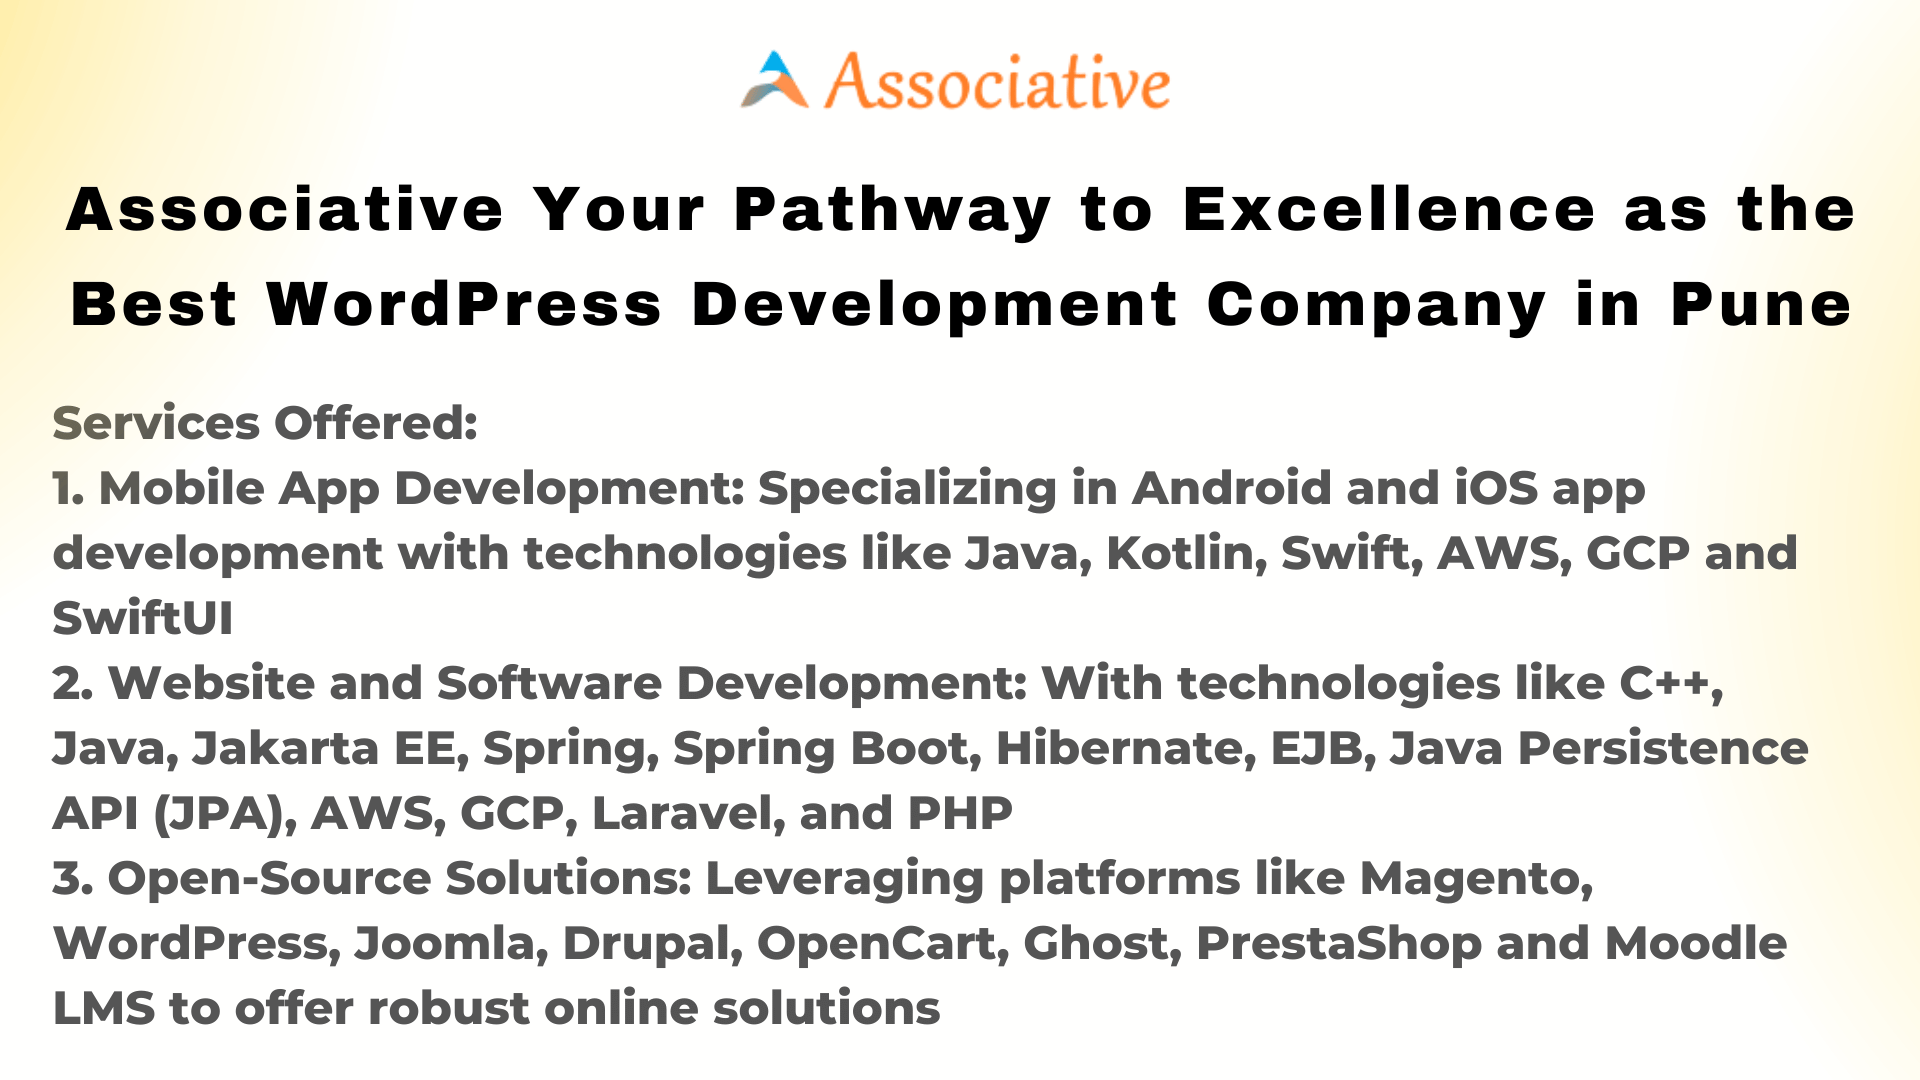 Associative Your Pathway to Excellence as the Best WordPress Development Company in Pune